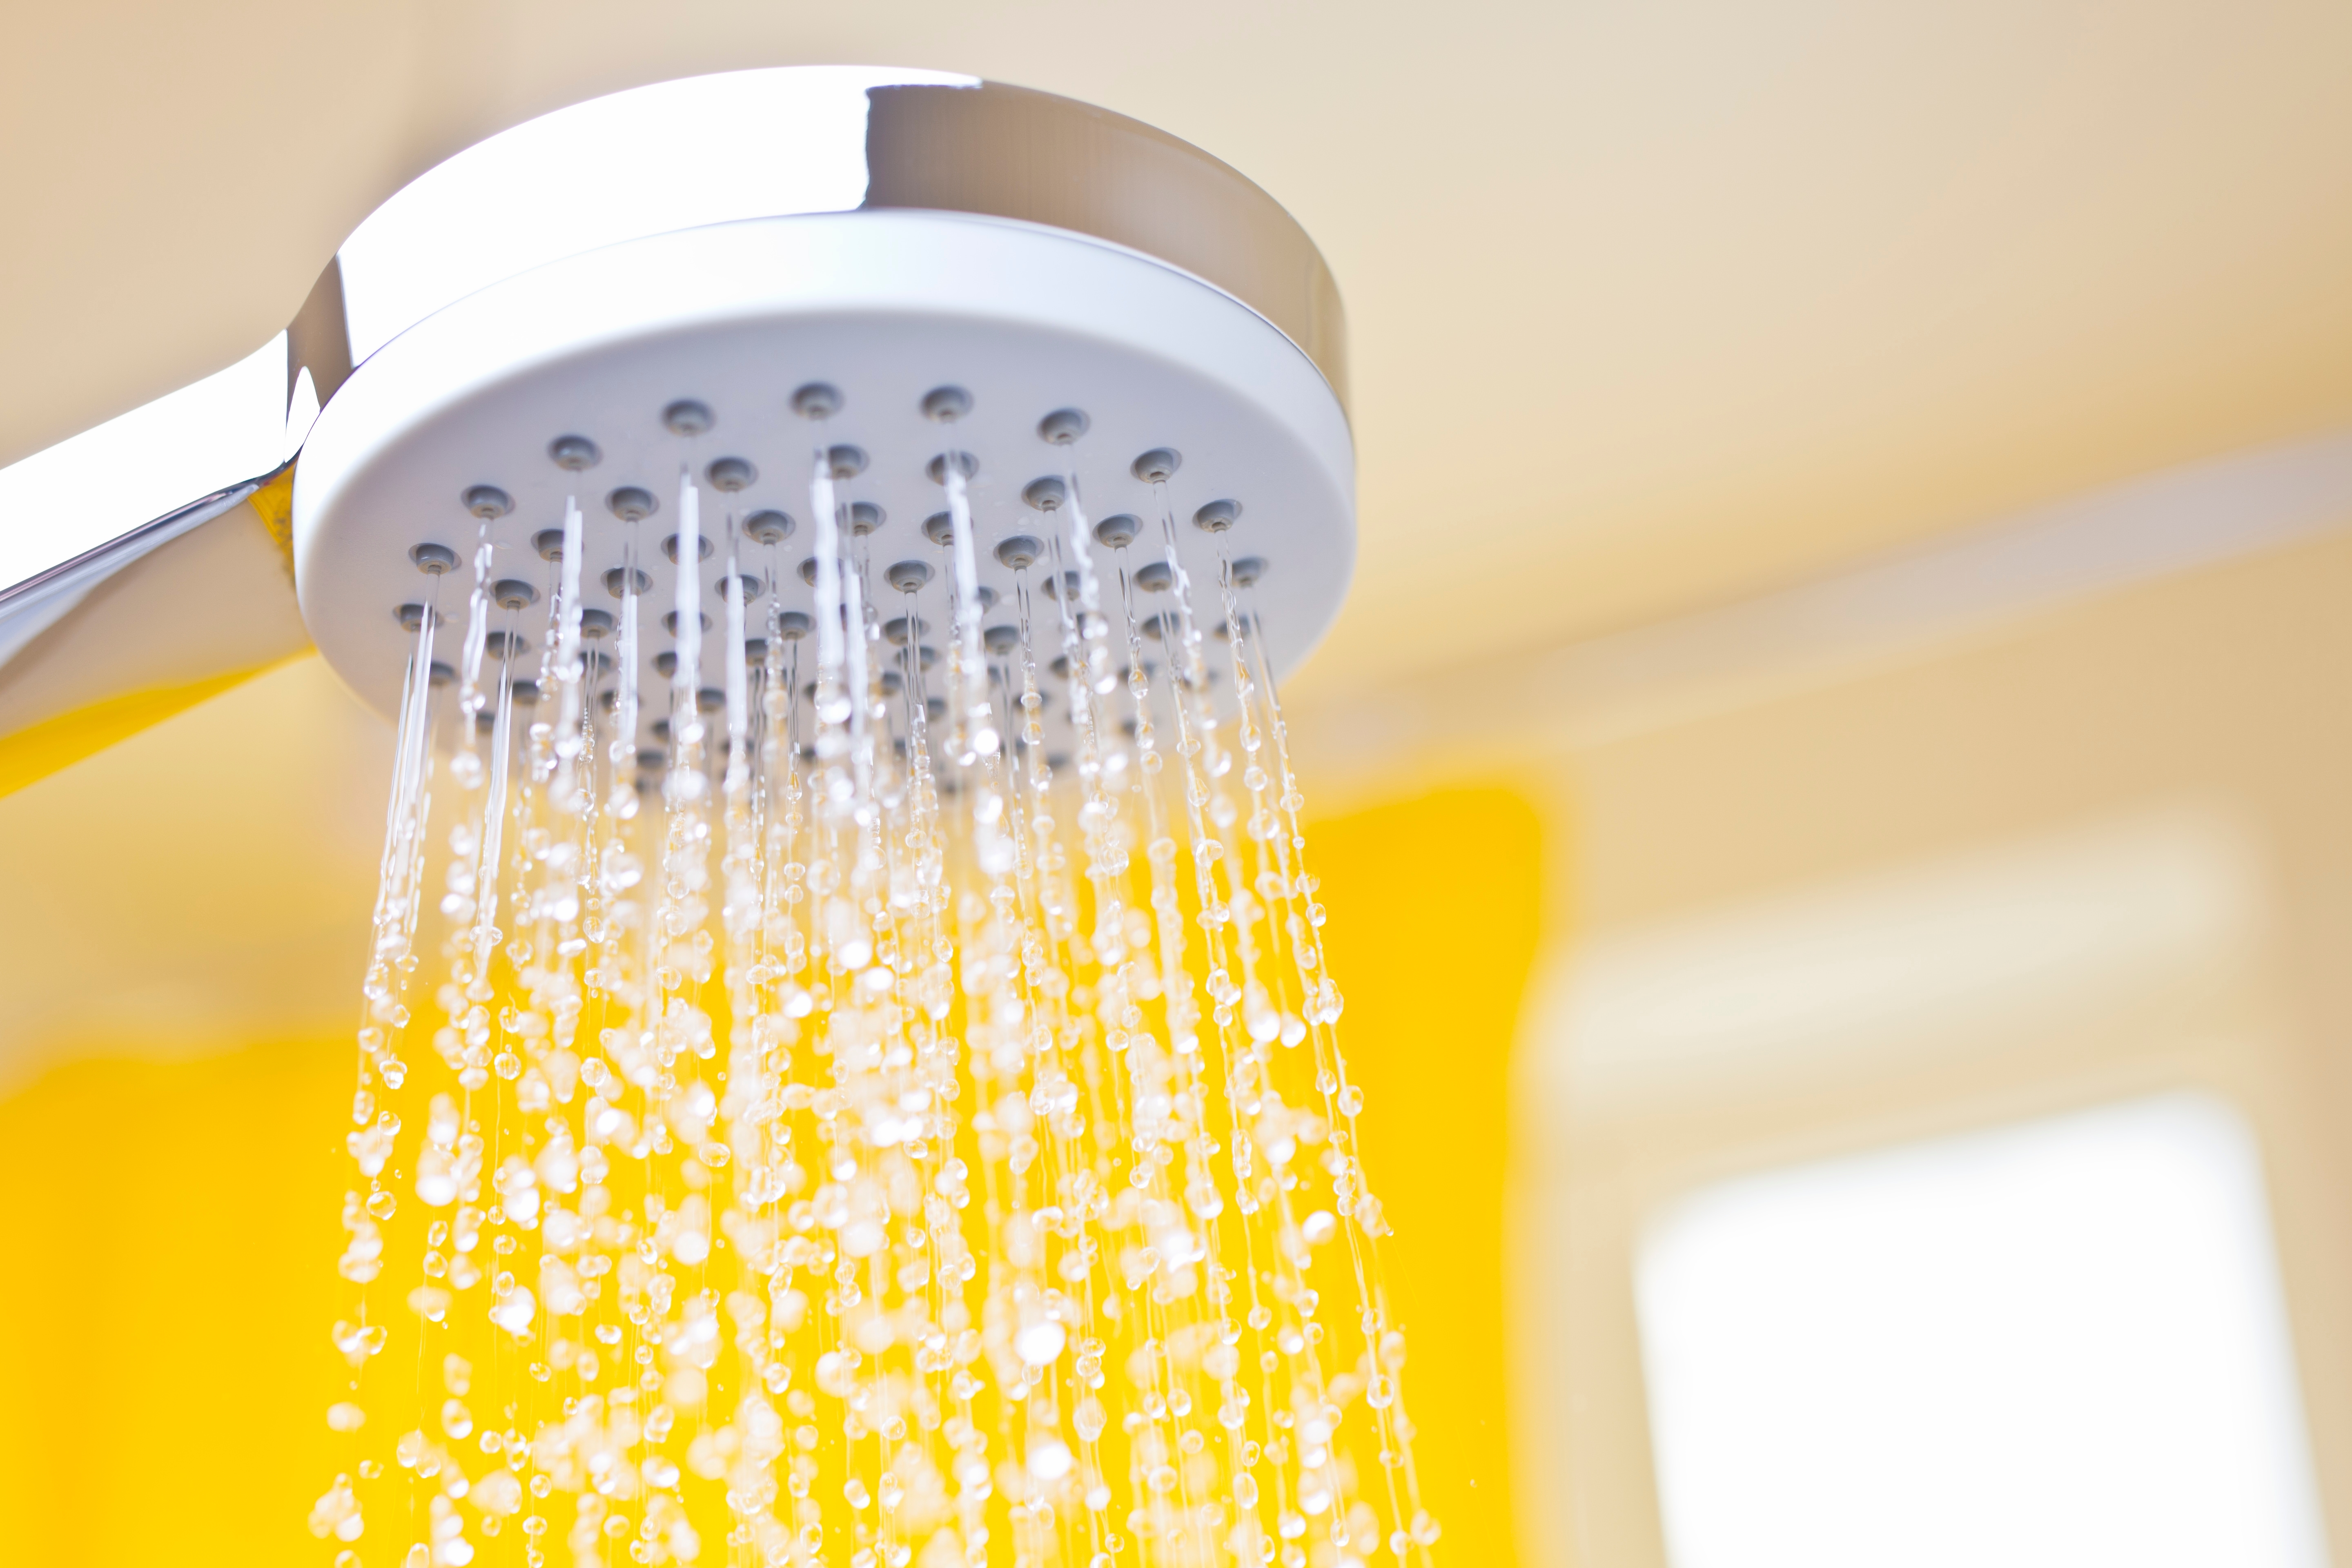 Adding a vitamin C shower filter to your shower head can help brighten gray hair